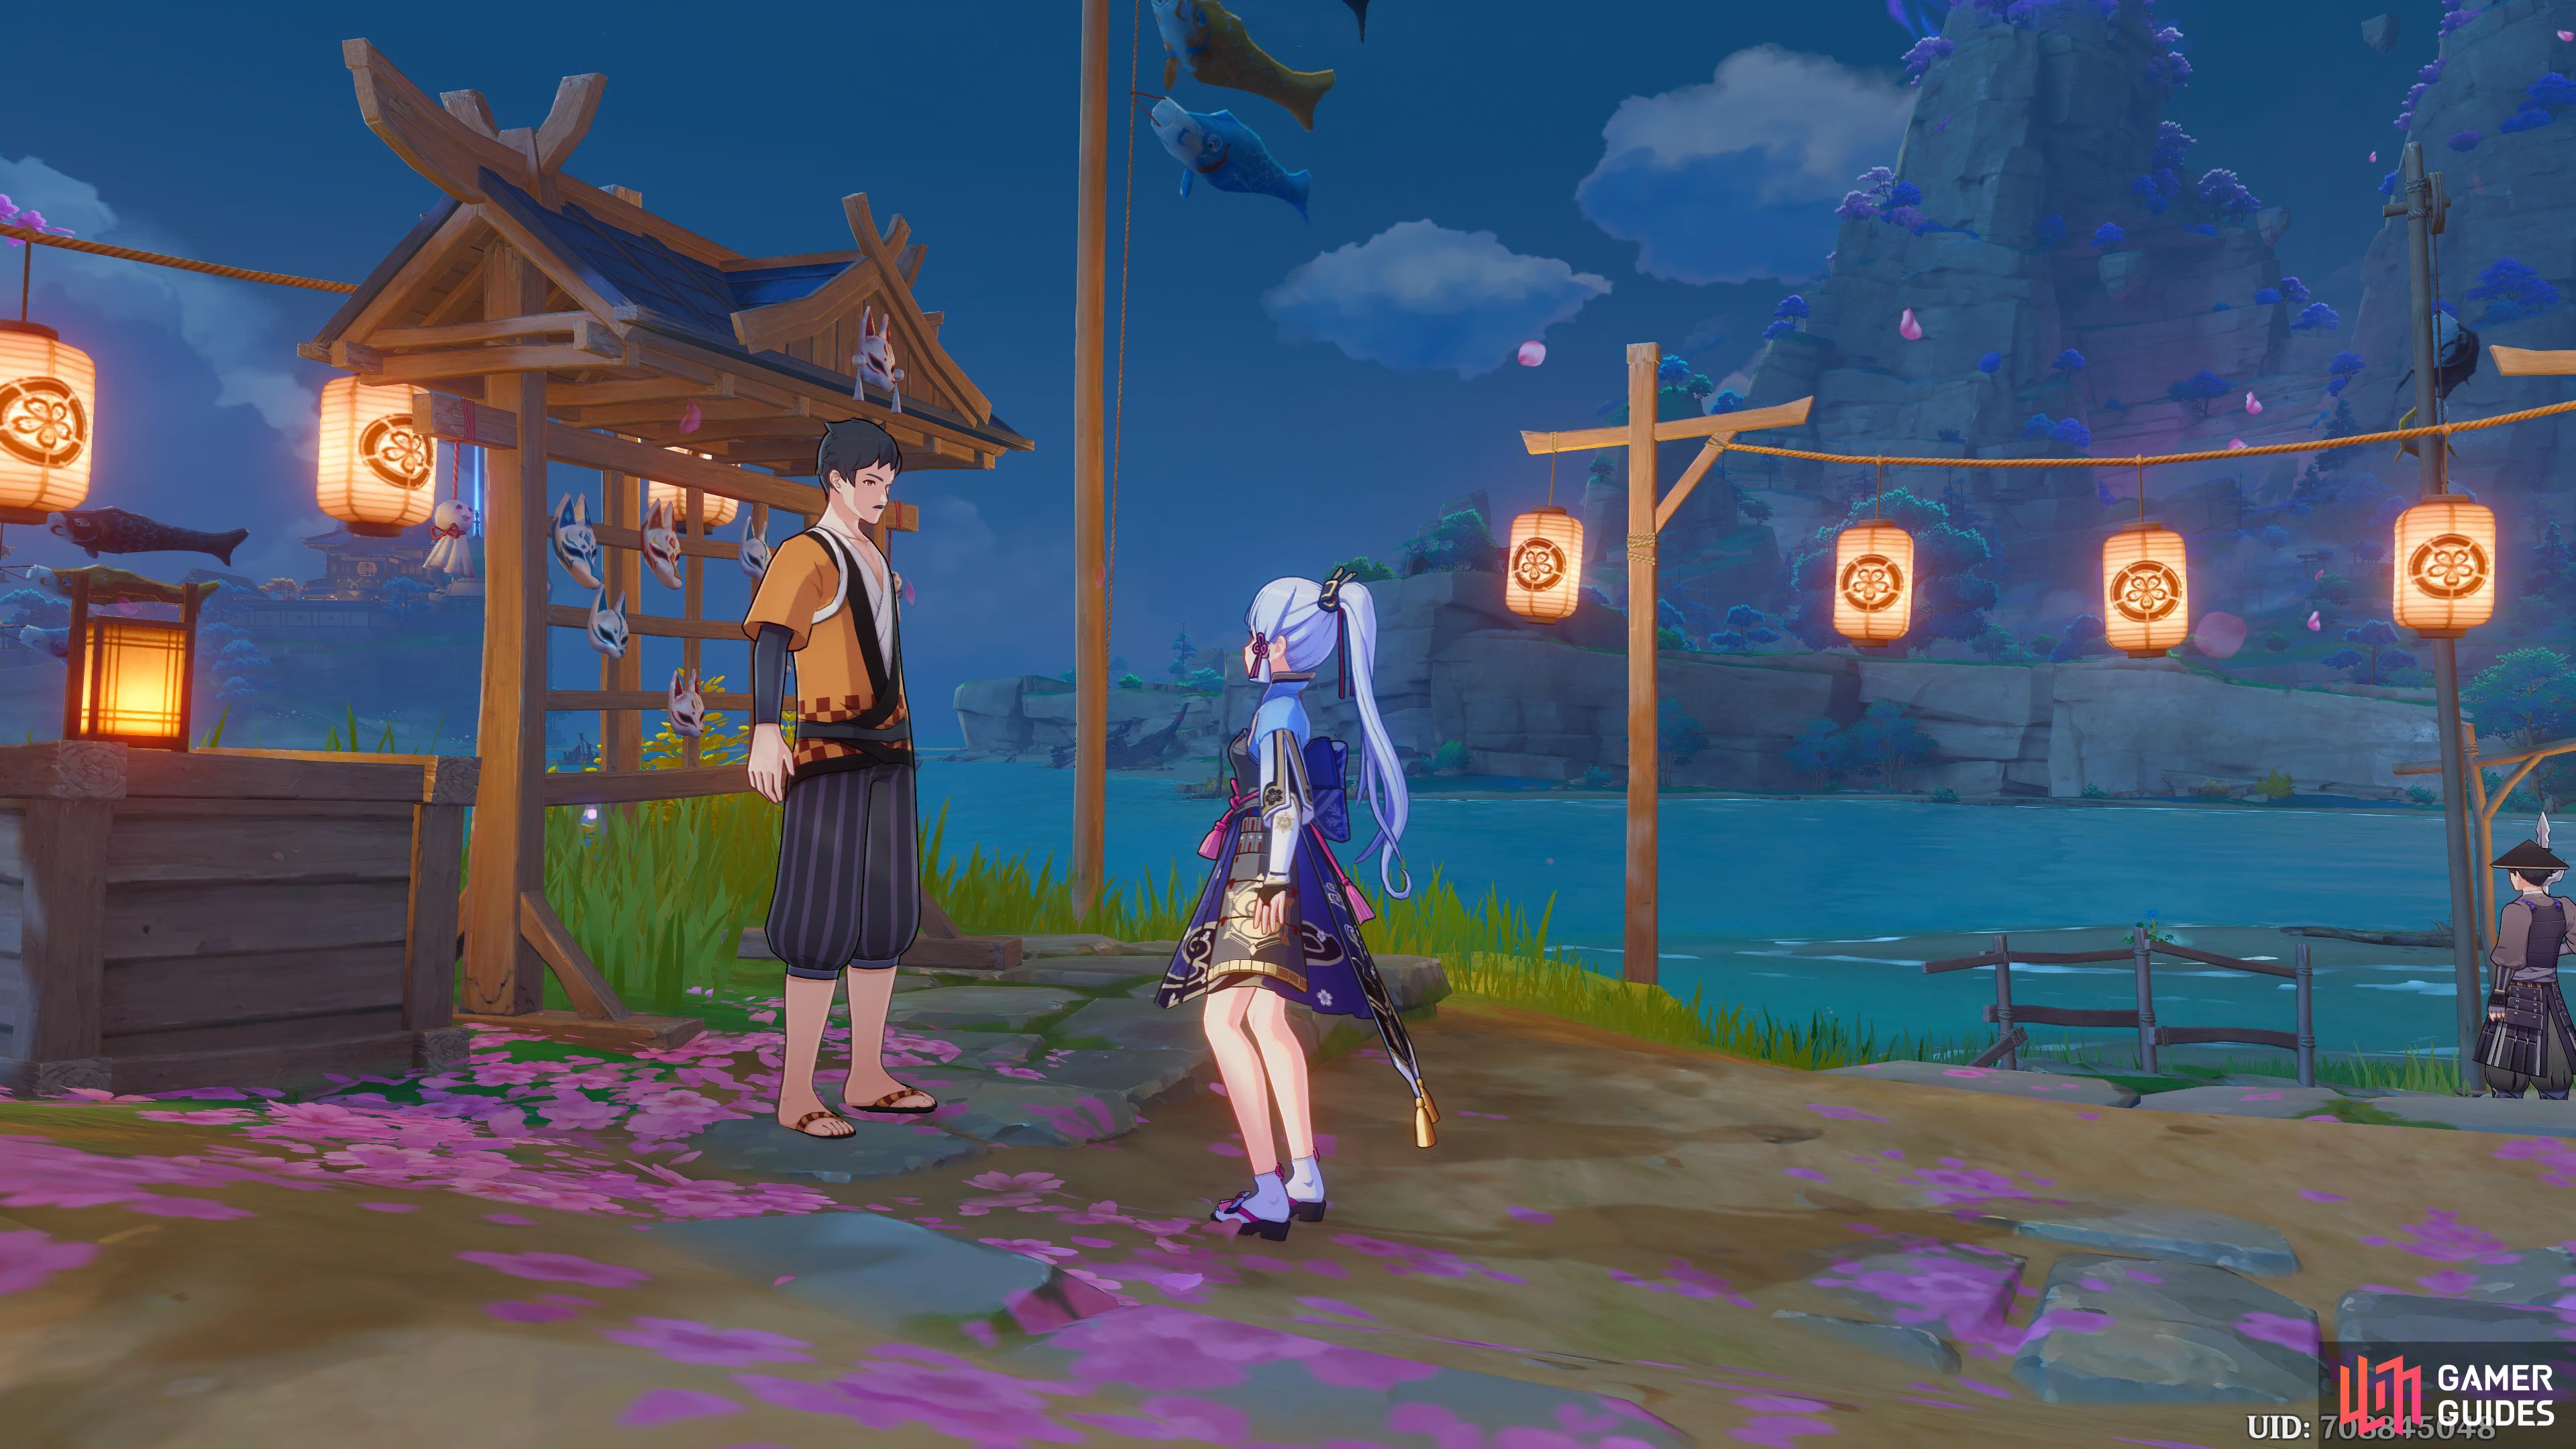 Sanden is surprised to see Ayaka at the festival.